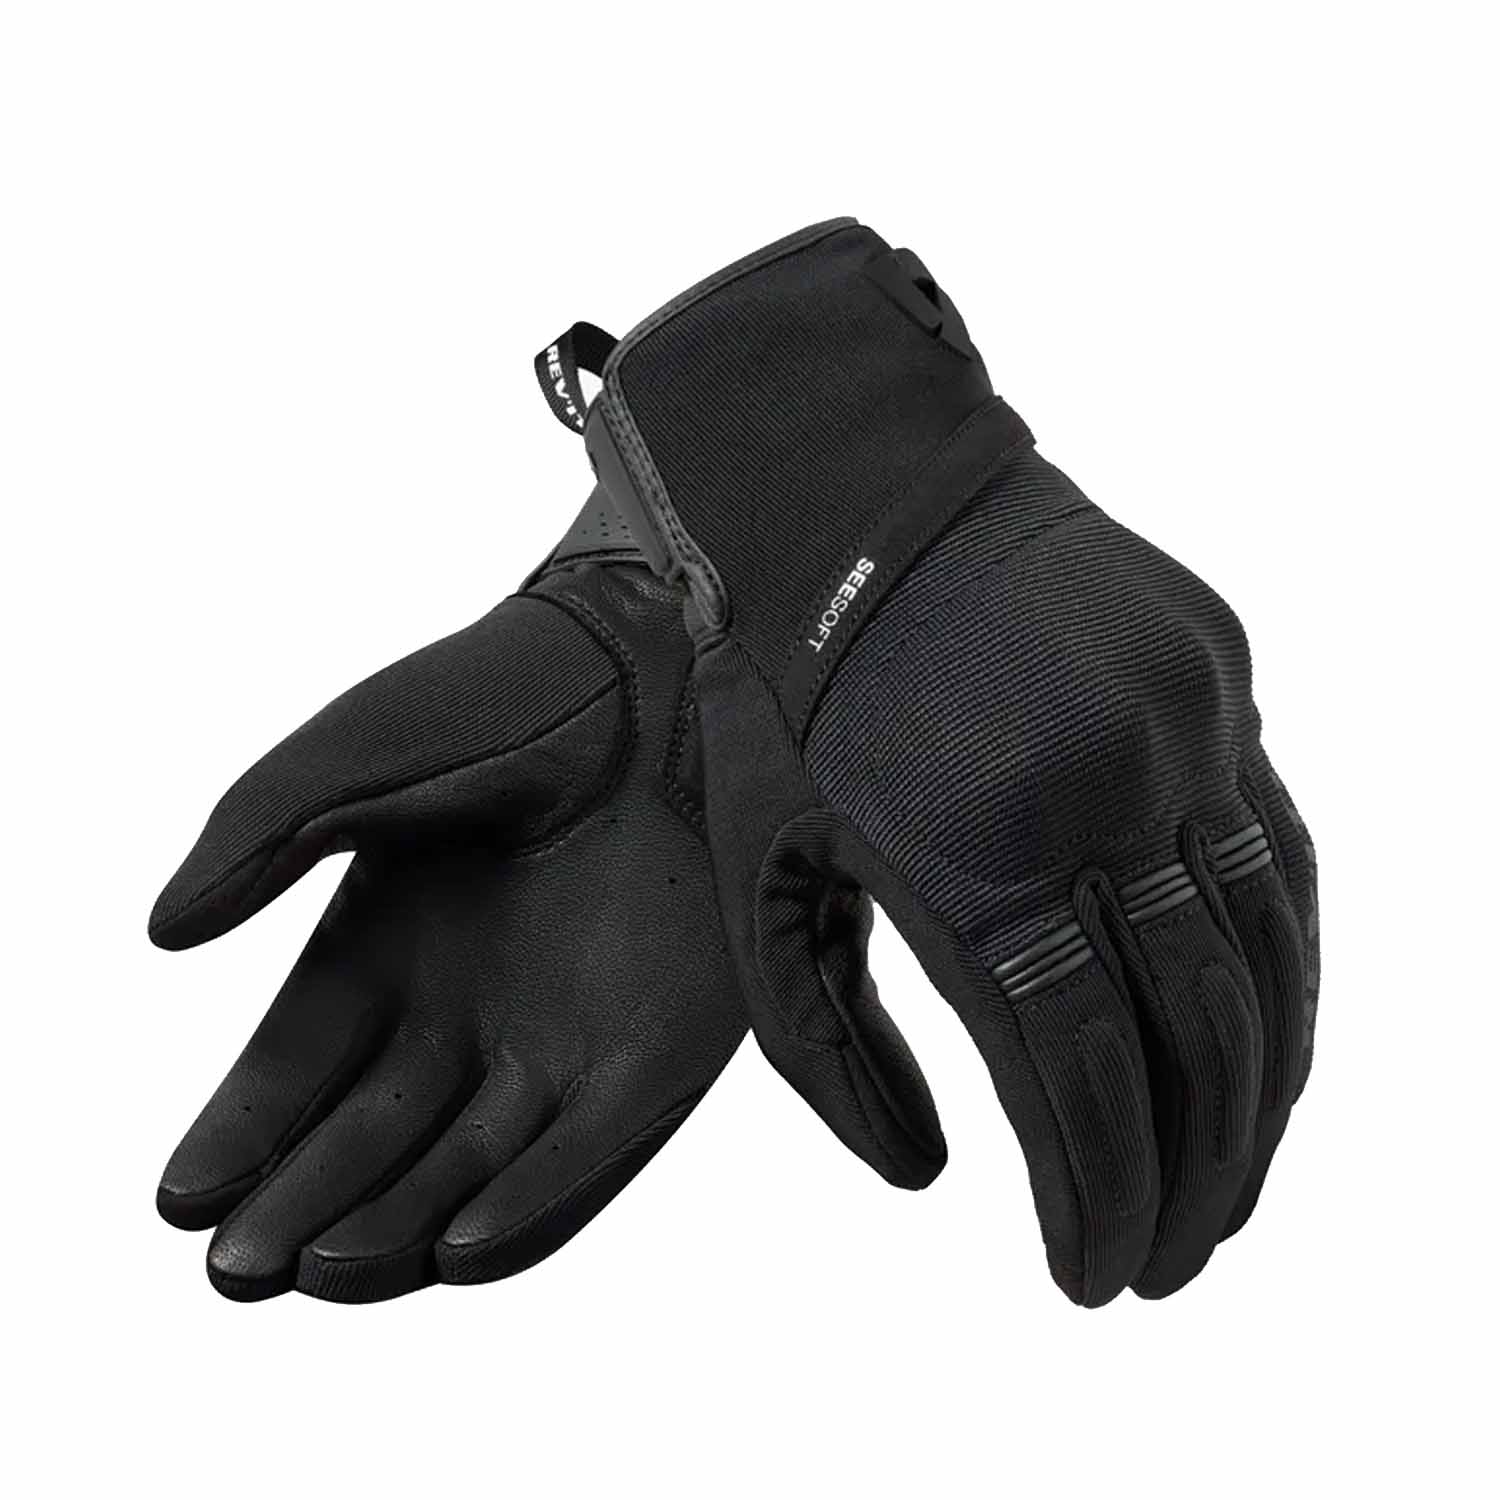 Image of EU REV'IT! Mosca 2 Gloves Black Taille 4XL